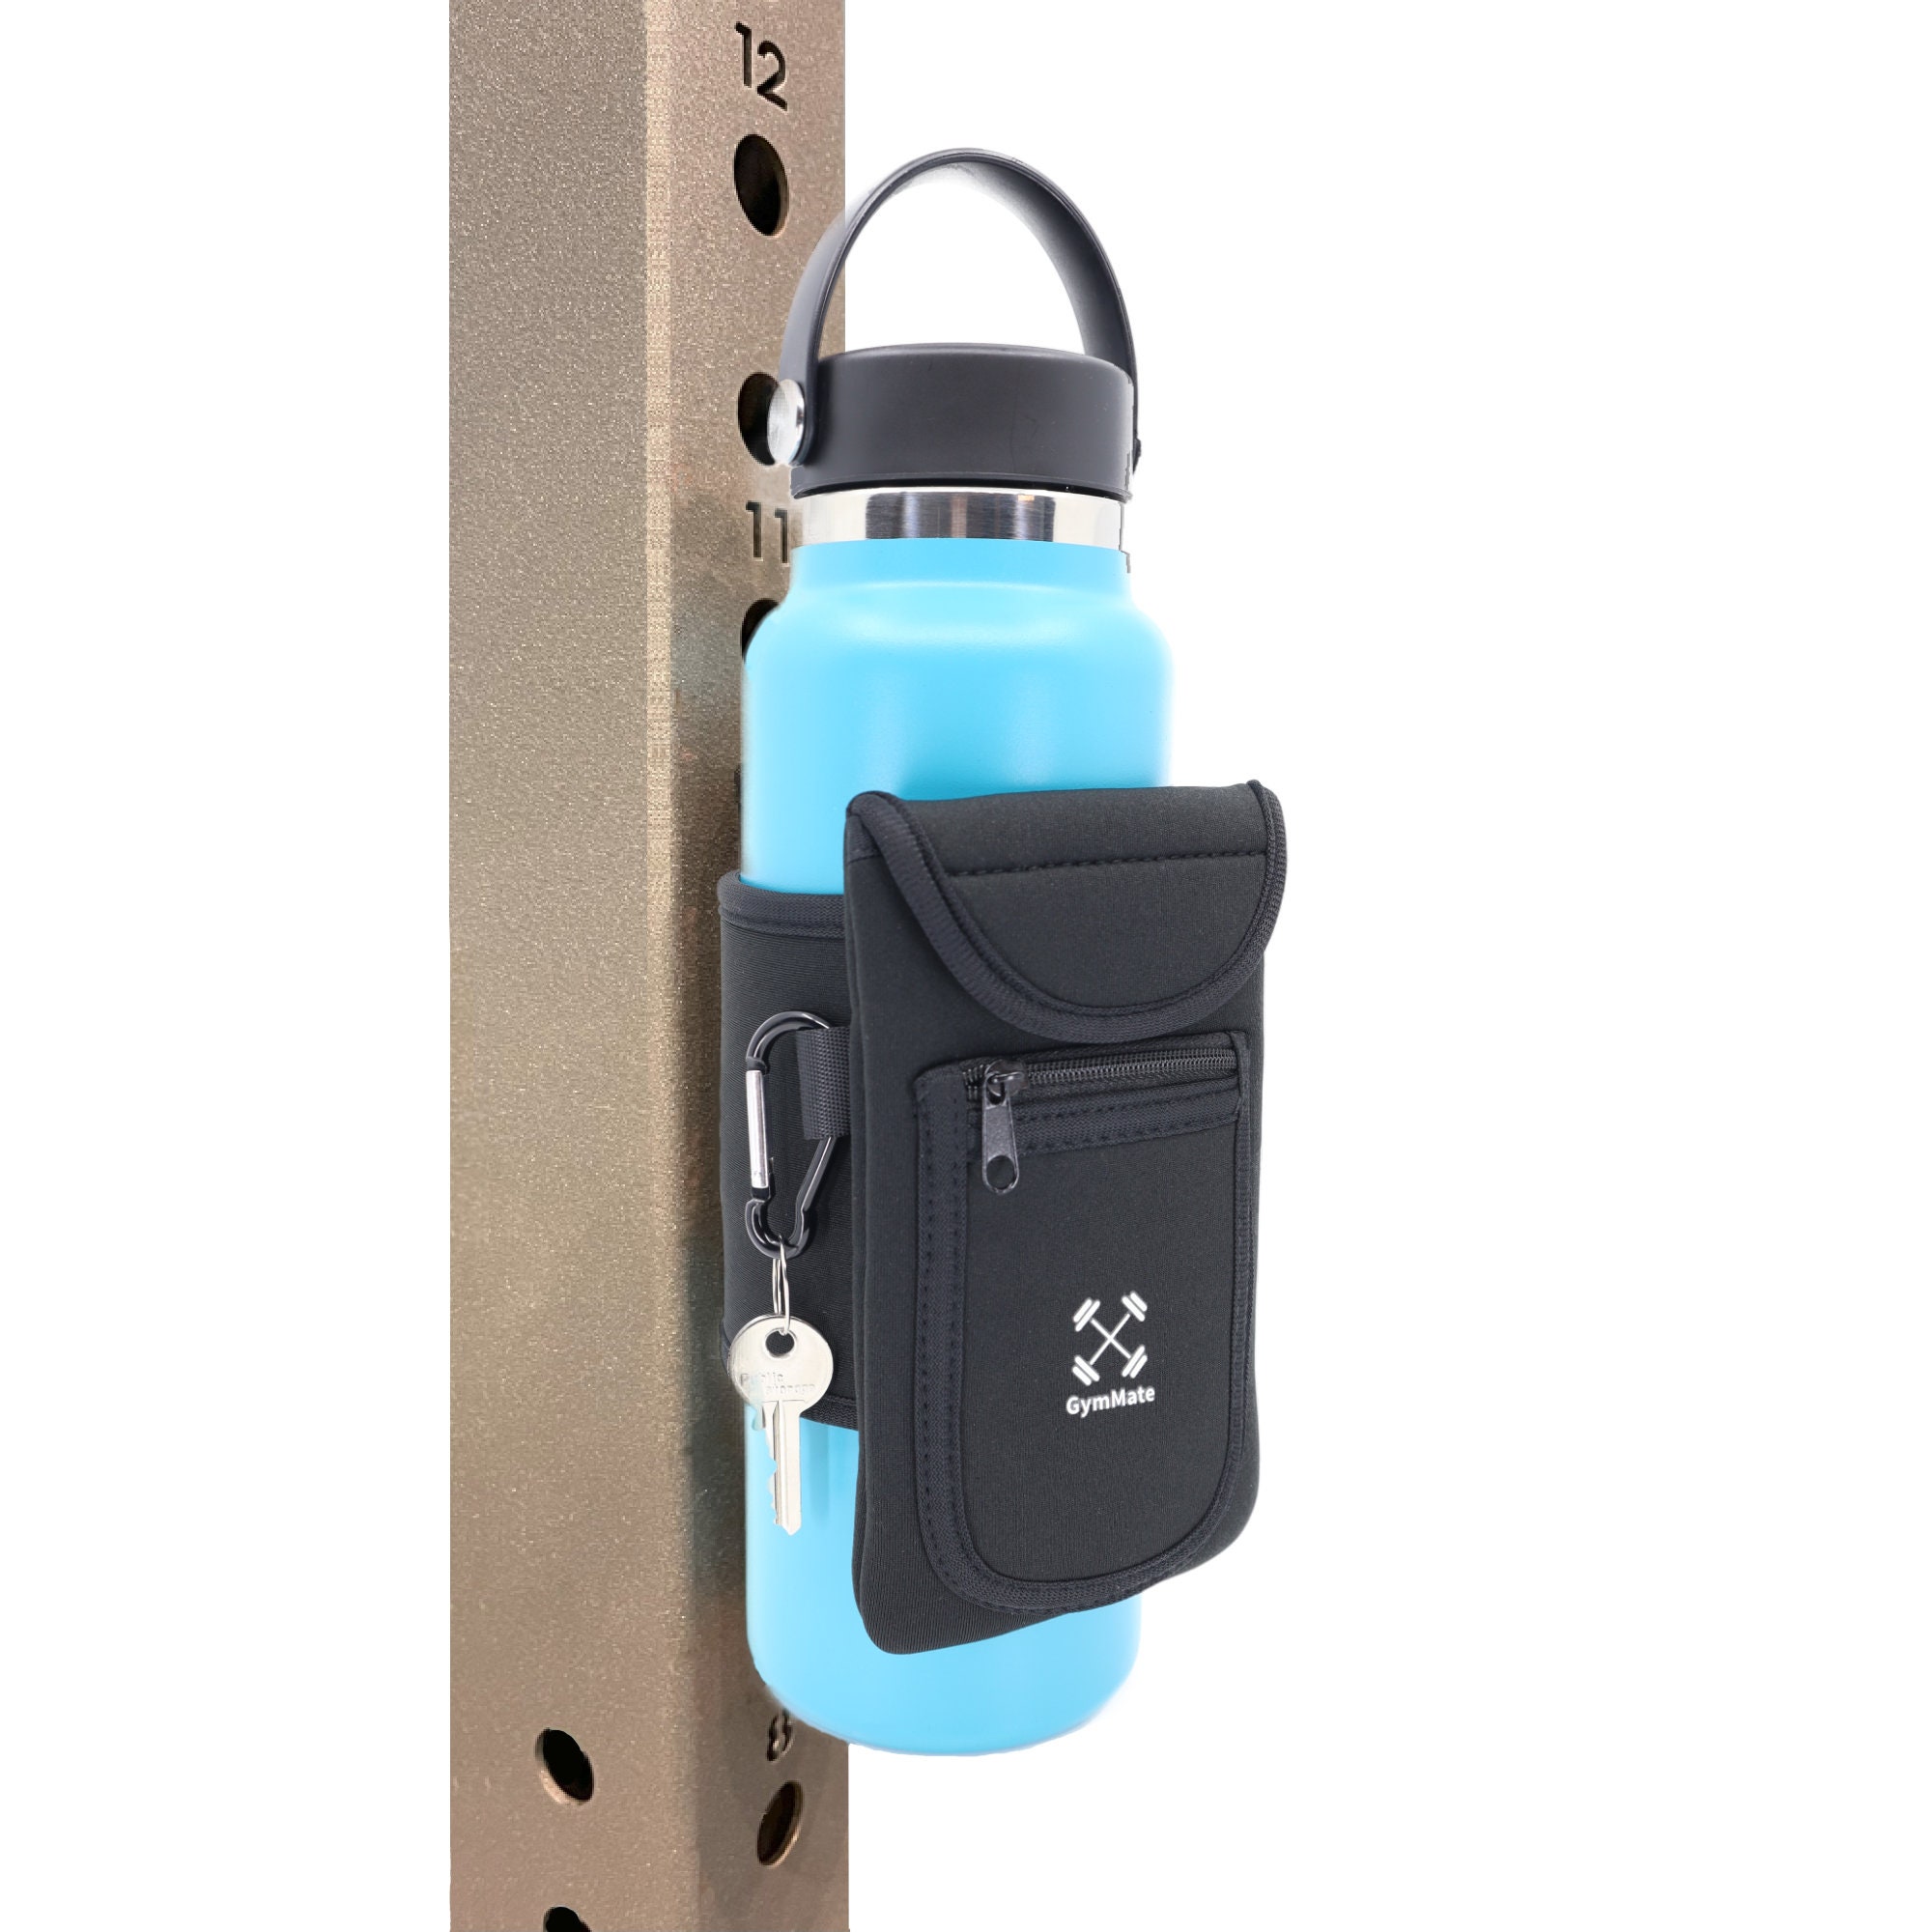 Gym Water Bottle Pouch -18-40 oz Water Bottle Holder for Running, Walking,  Workout - Cell Phone Holder Caddy, Accessory Pockets for Keys and Cards